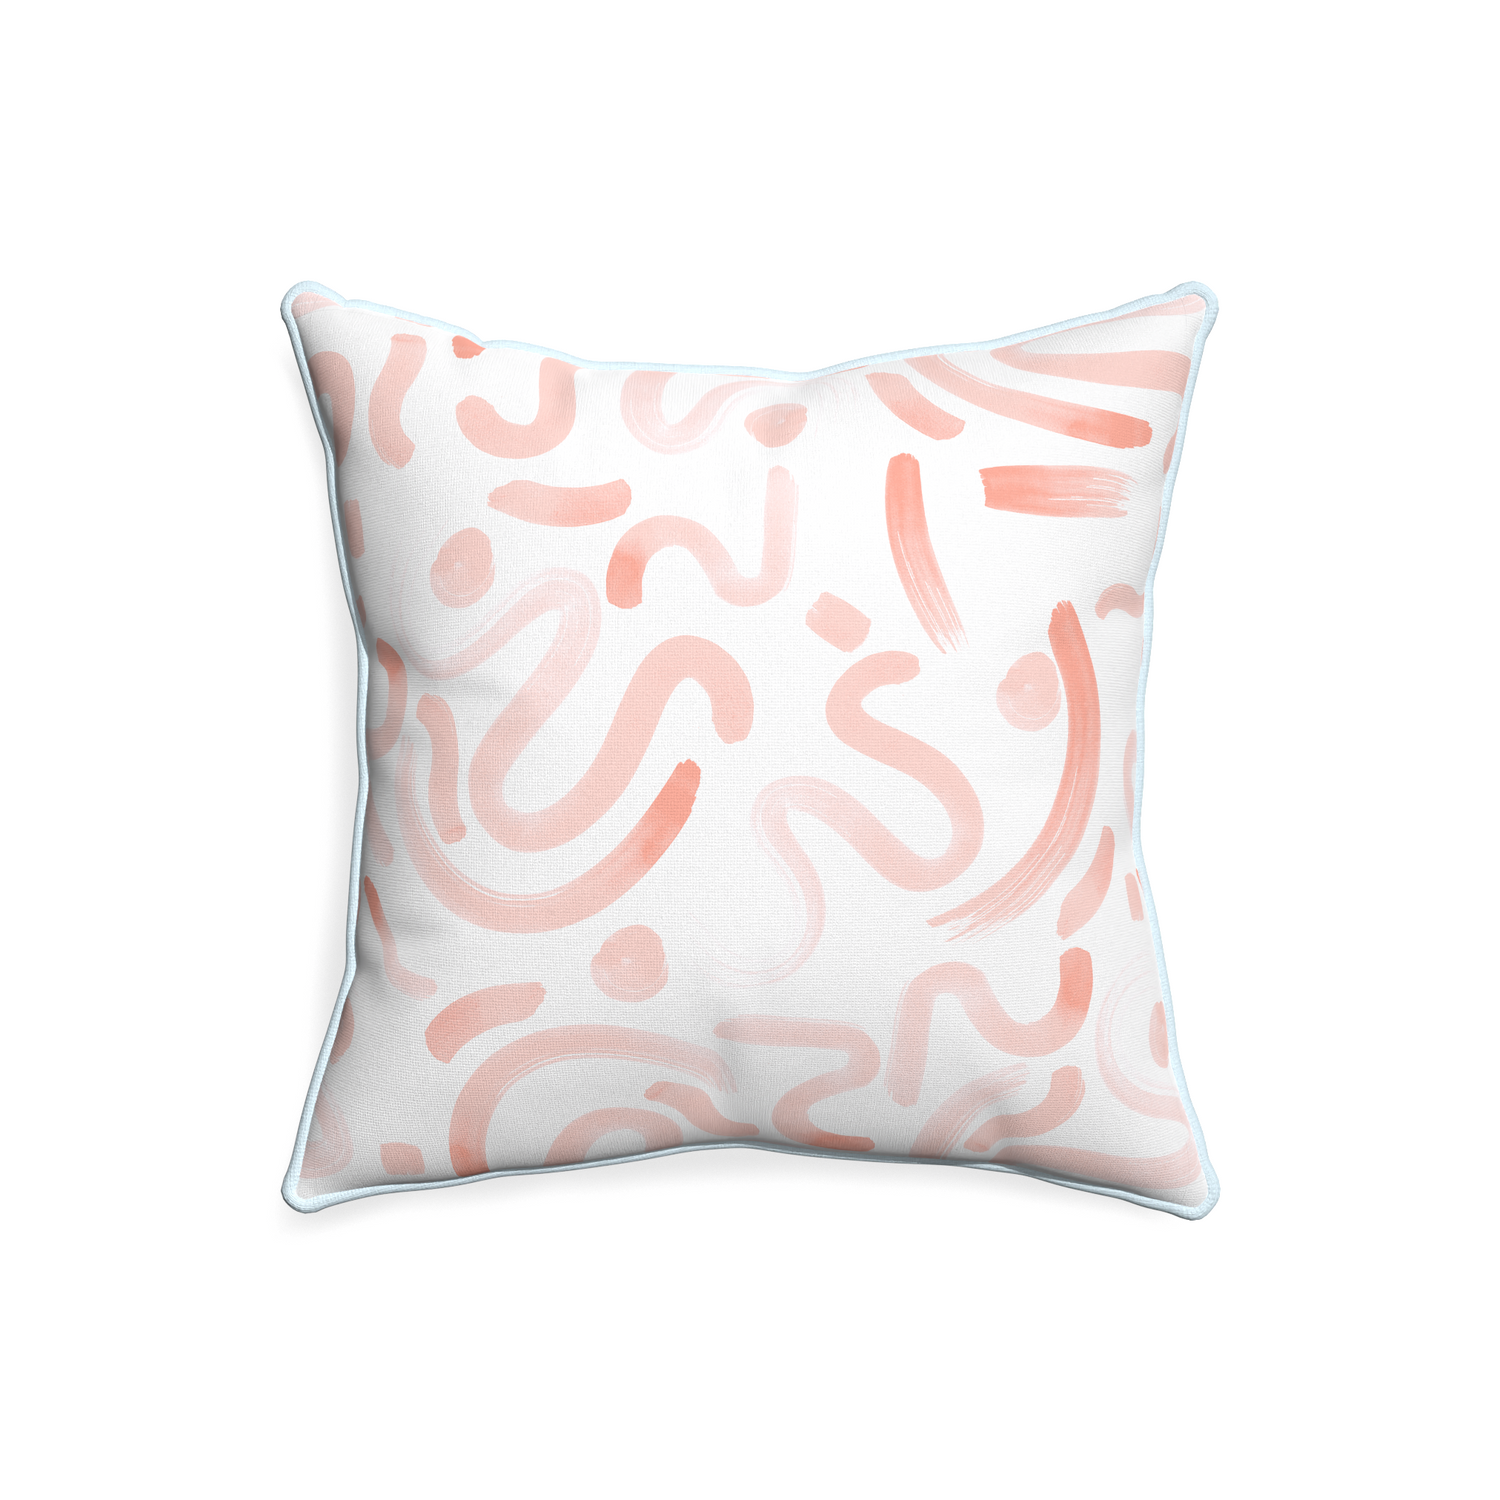 20-square hockney pink custom pink graphicpillow with powder piping on white background